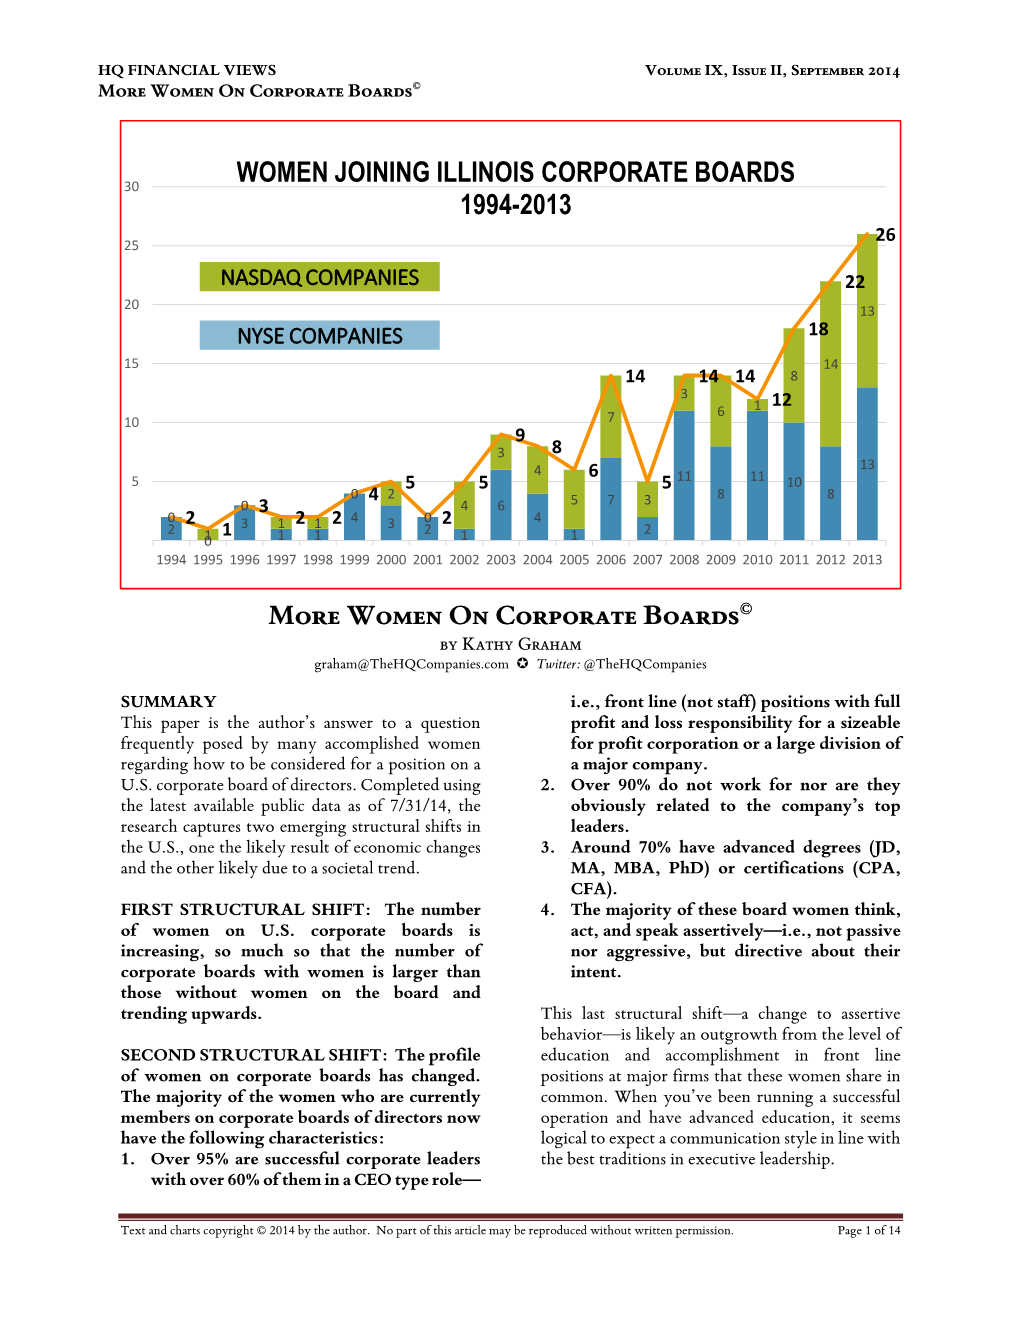 More Women on Corporate Boards©